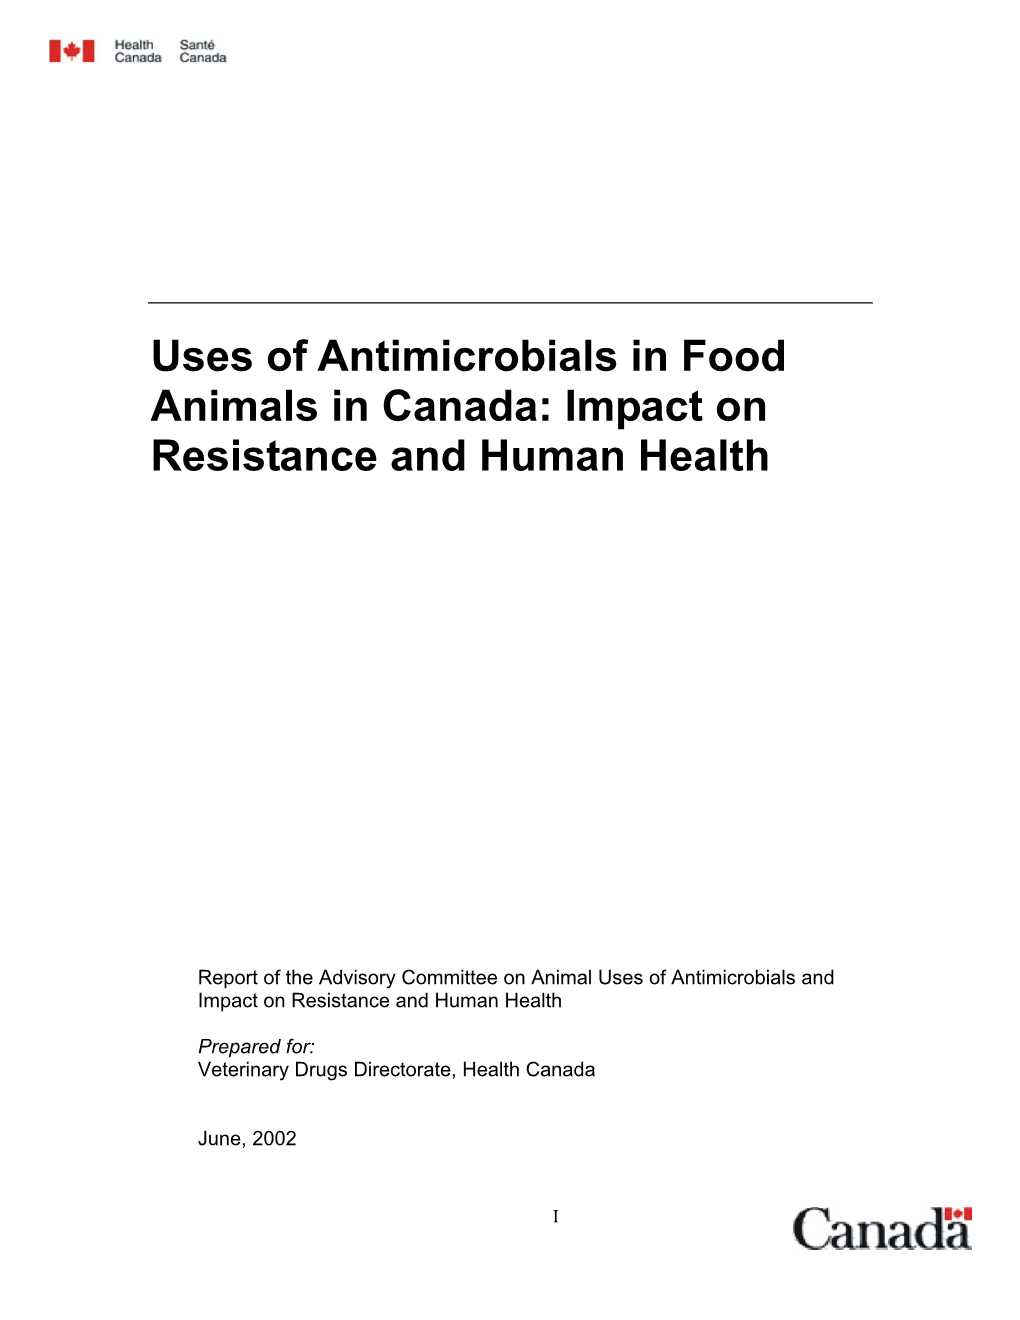 Uses of Antimicrobials in Food Animals in Canada: Impact on Resistance and Human Health